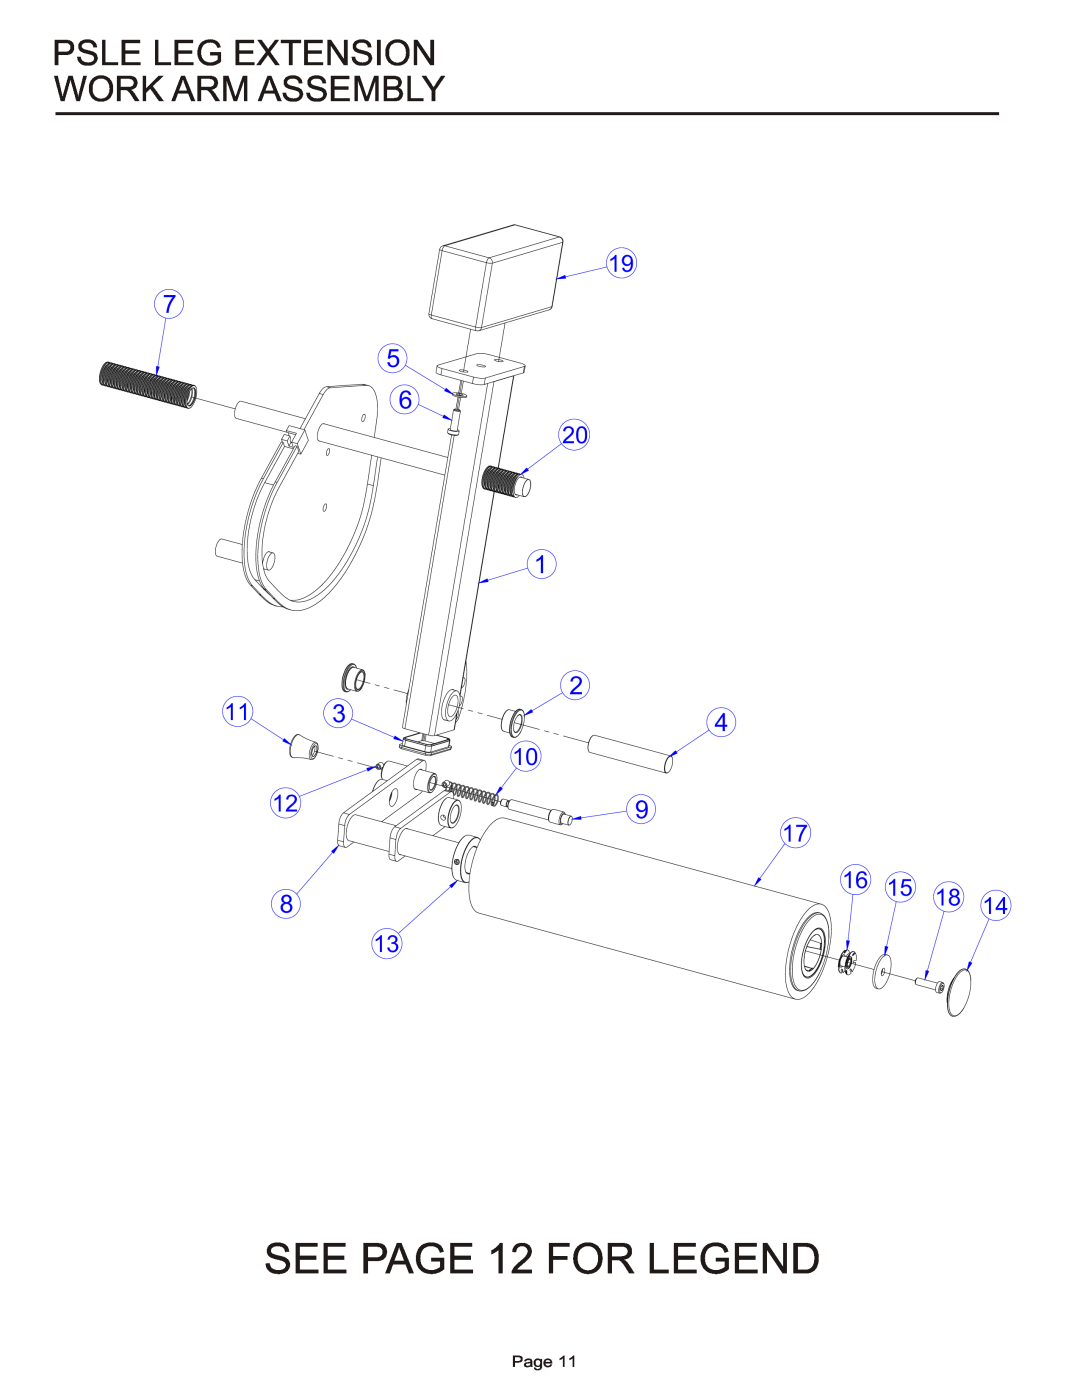 Life Fitness PSLE manual SEE PAGE 12 FOR LEGEND, Psle Leg Extension Work Arm Assembly, Page 